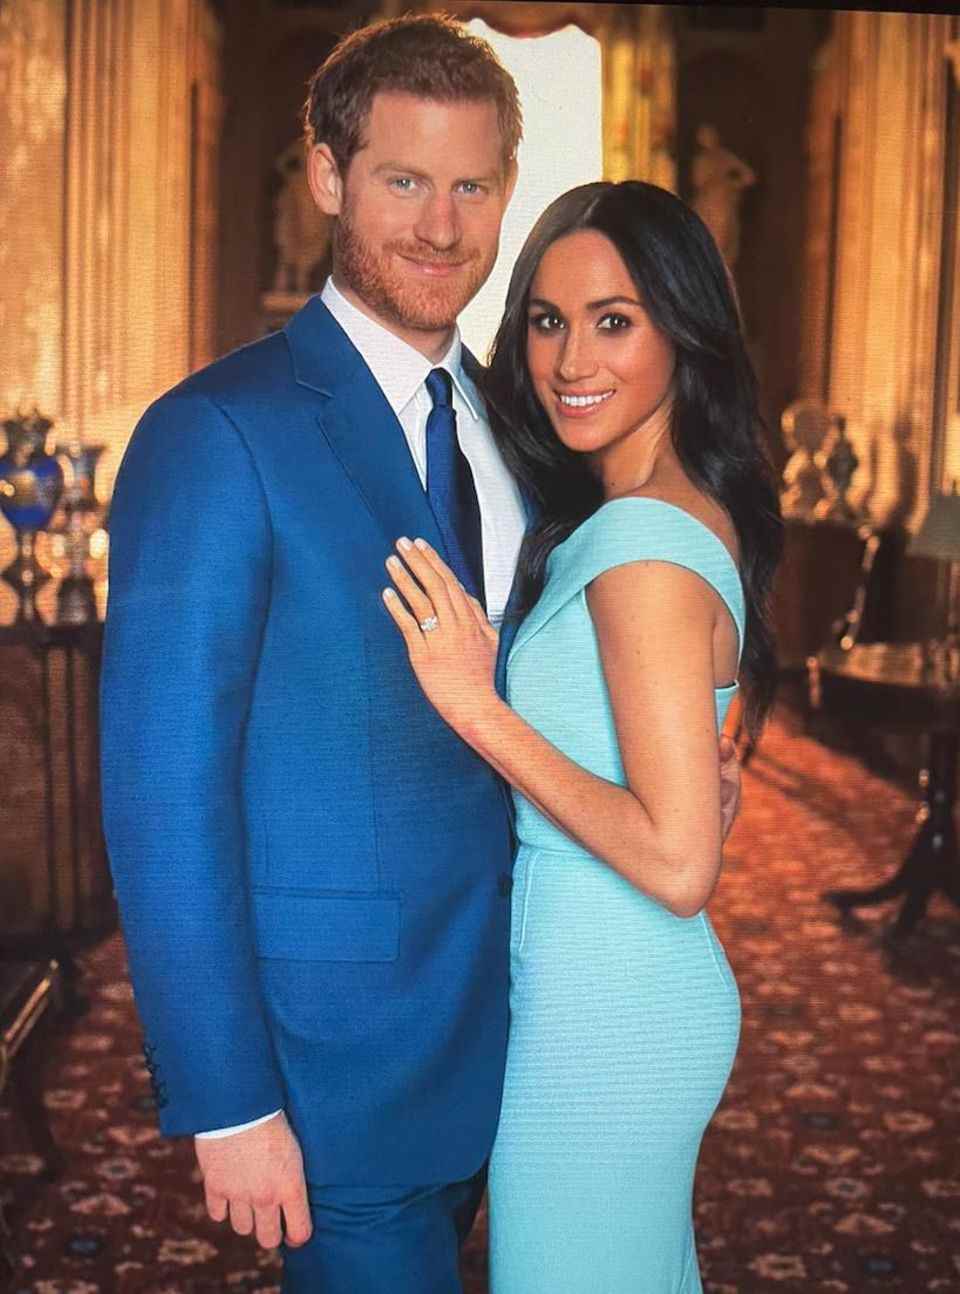 This photo of Harry and Meghan is featured in the documentary for the first time